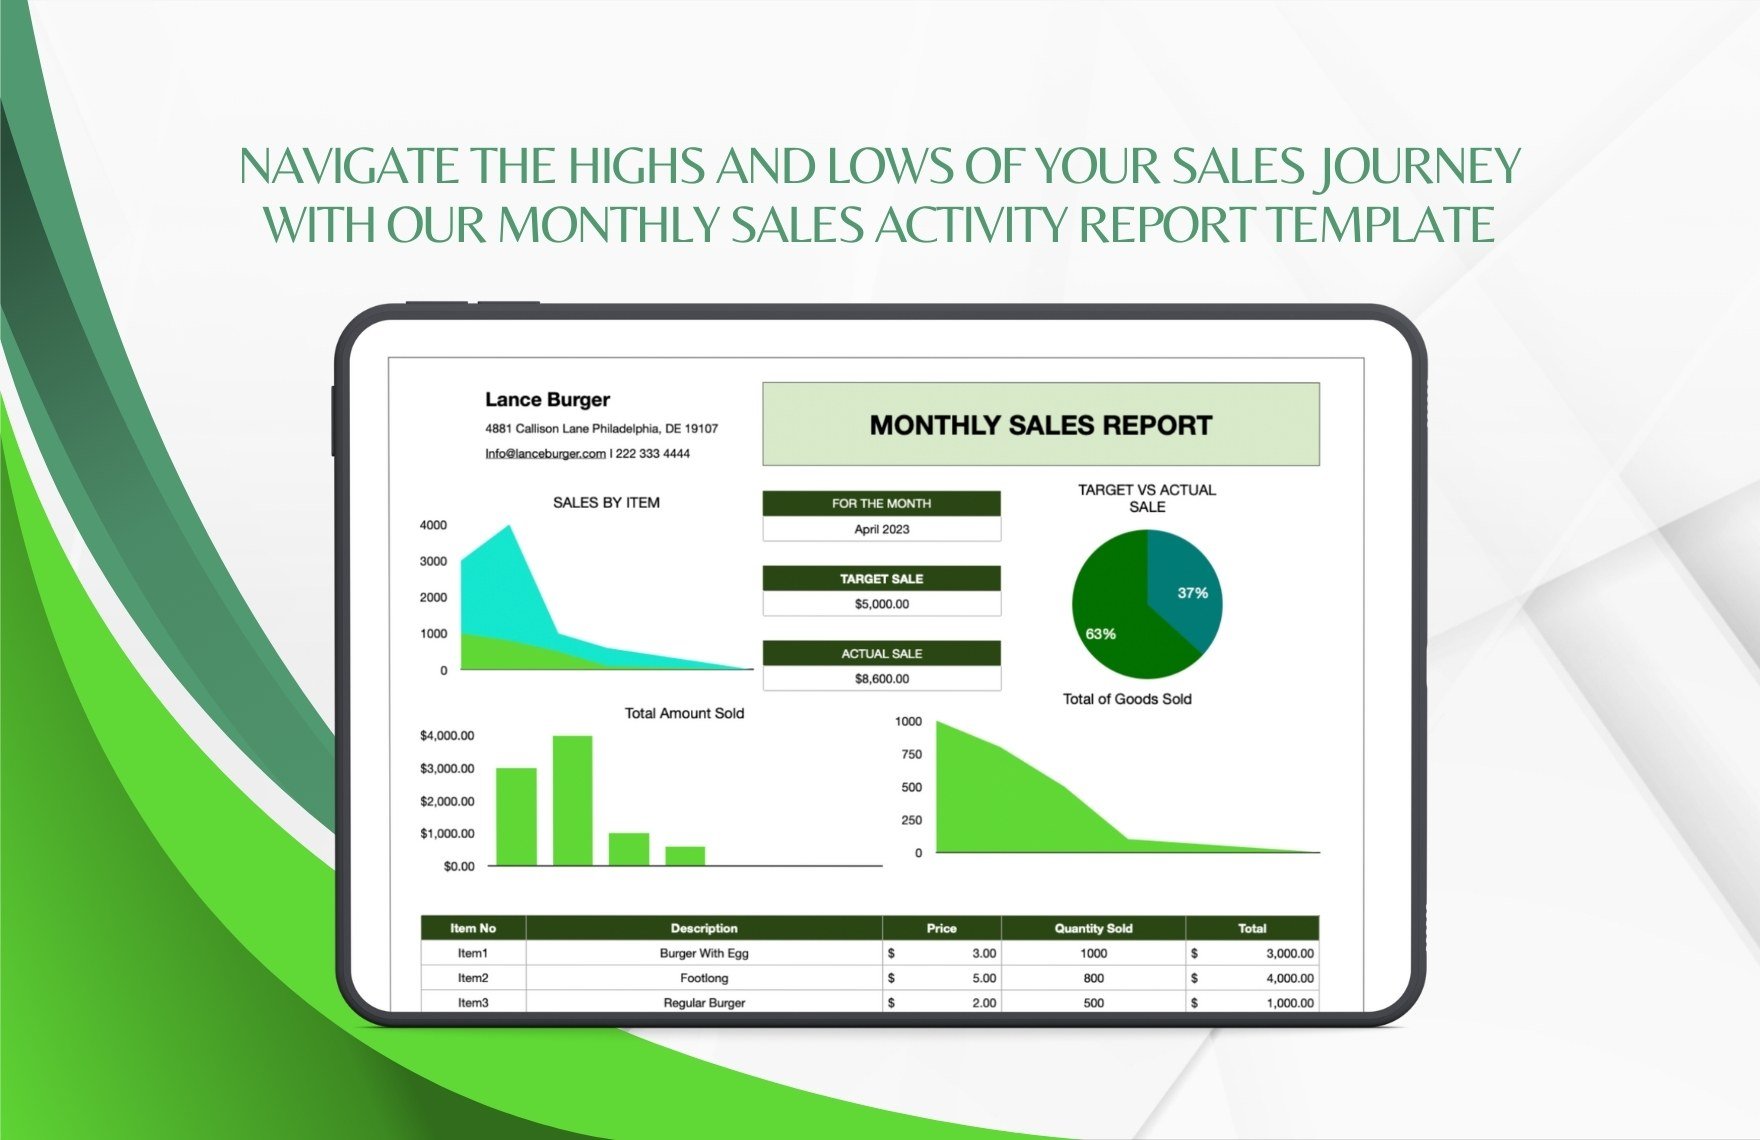 Monthly Sales Activity Report Template